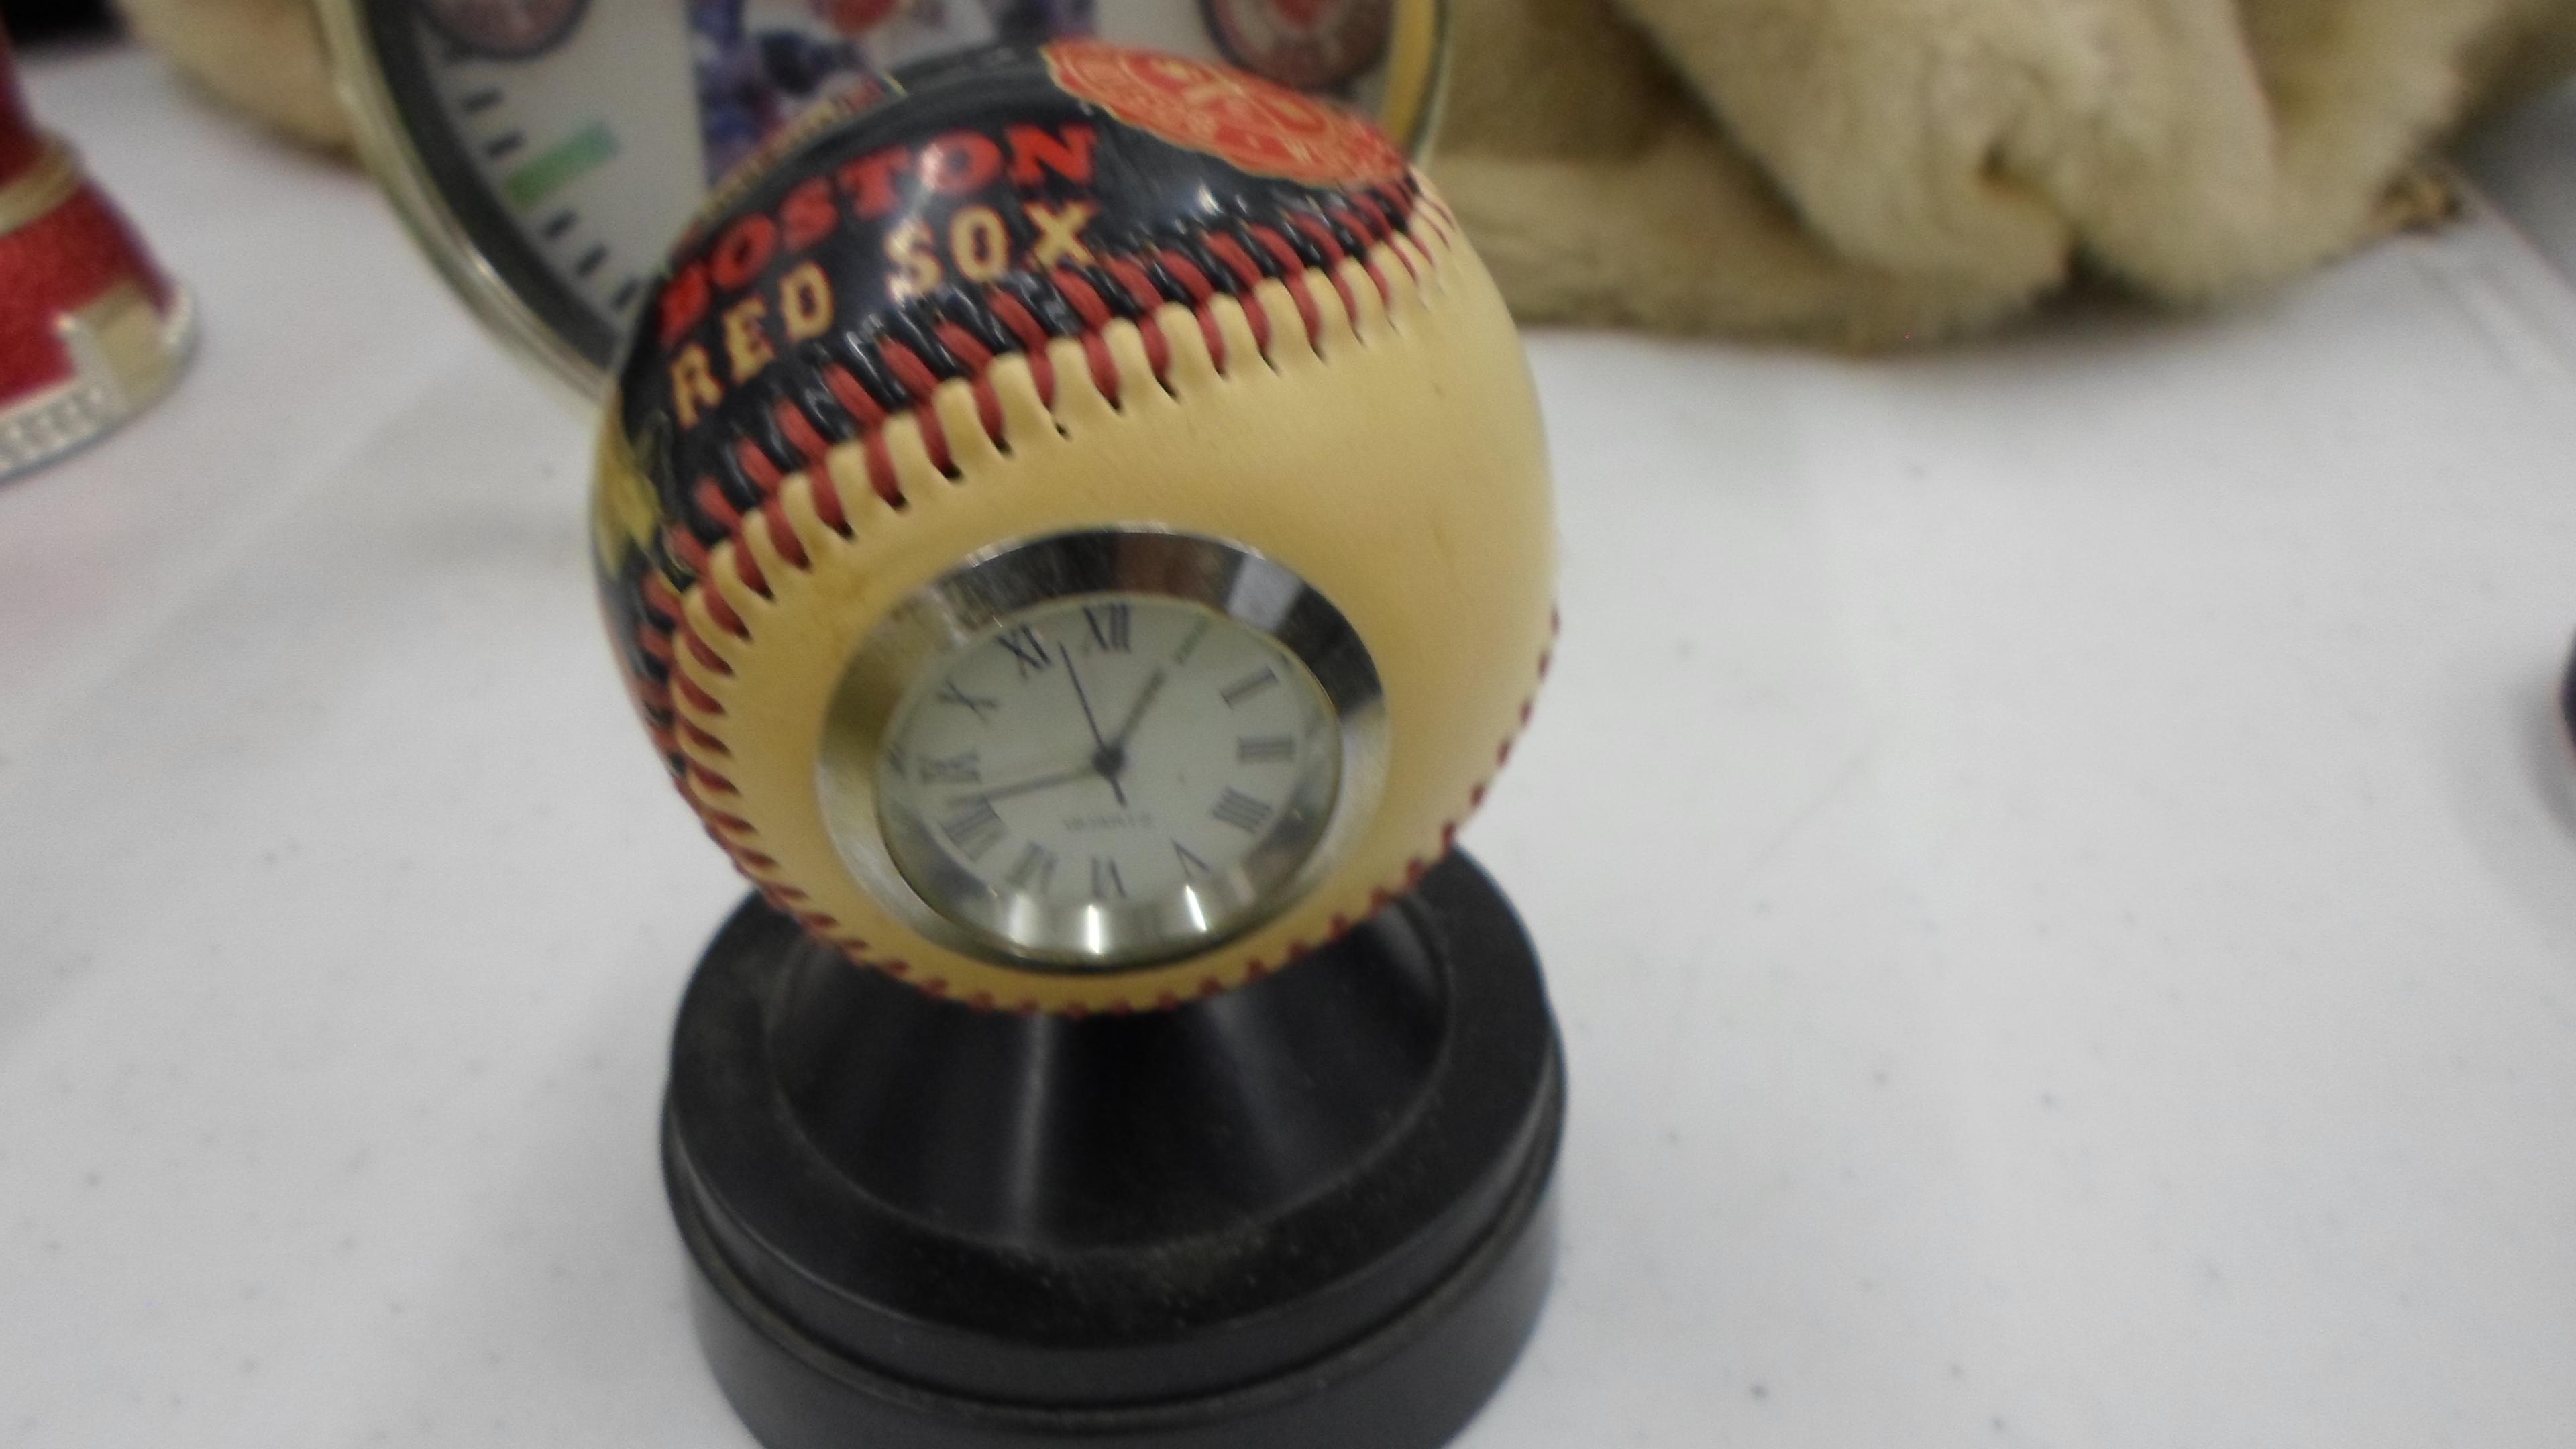 red sox decor, two clocks one is made of a game ball